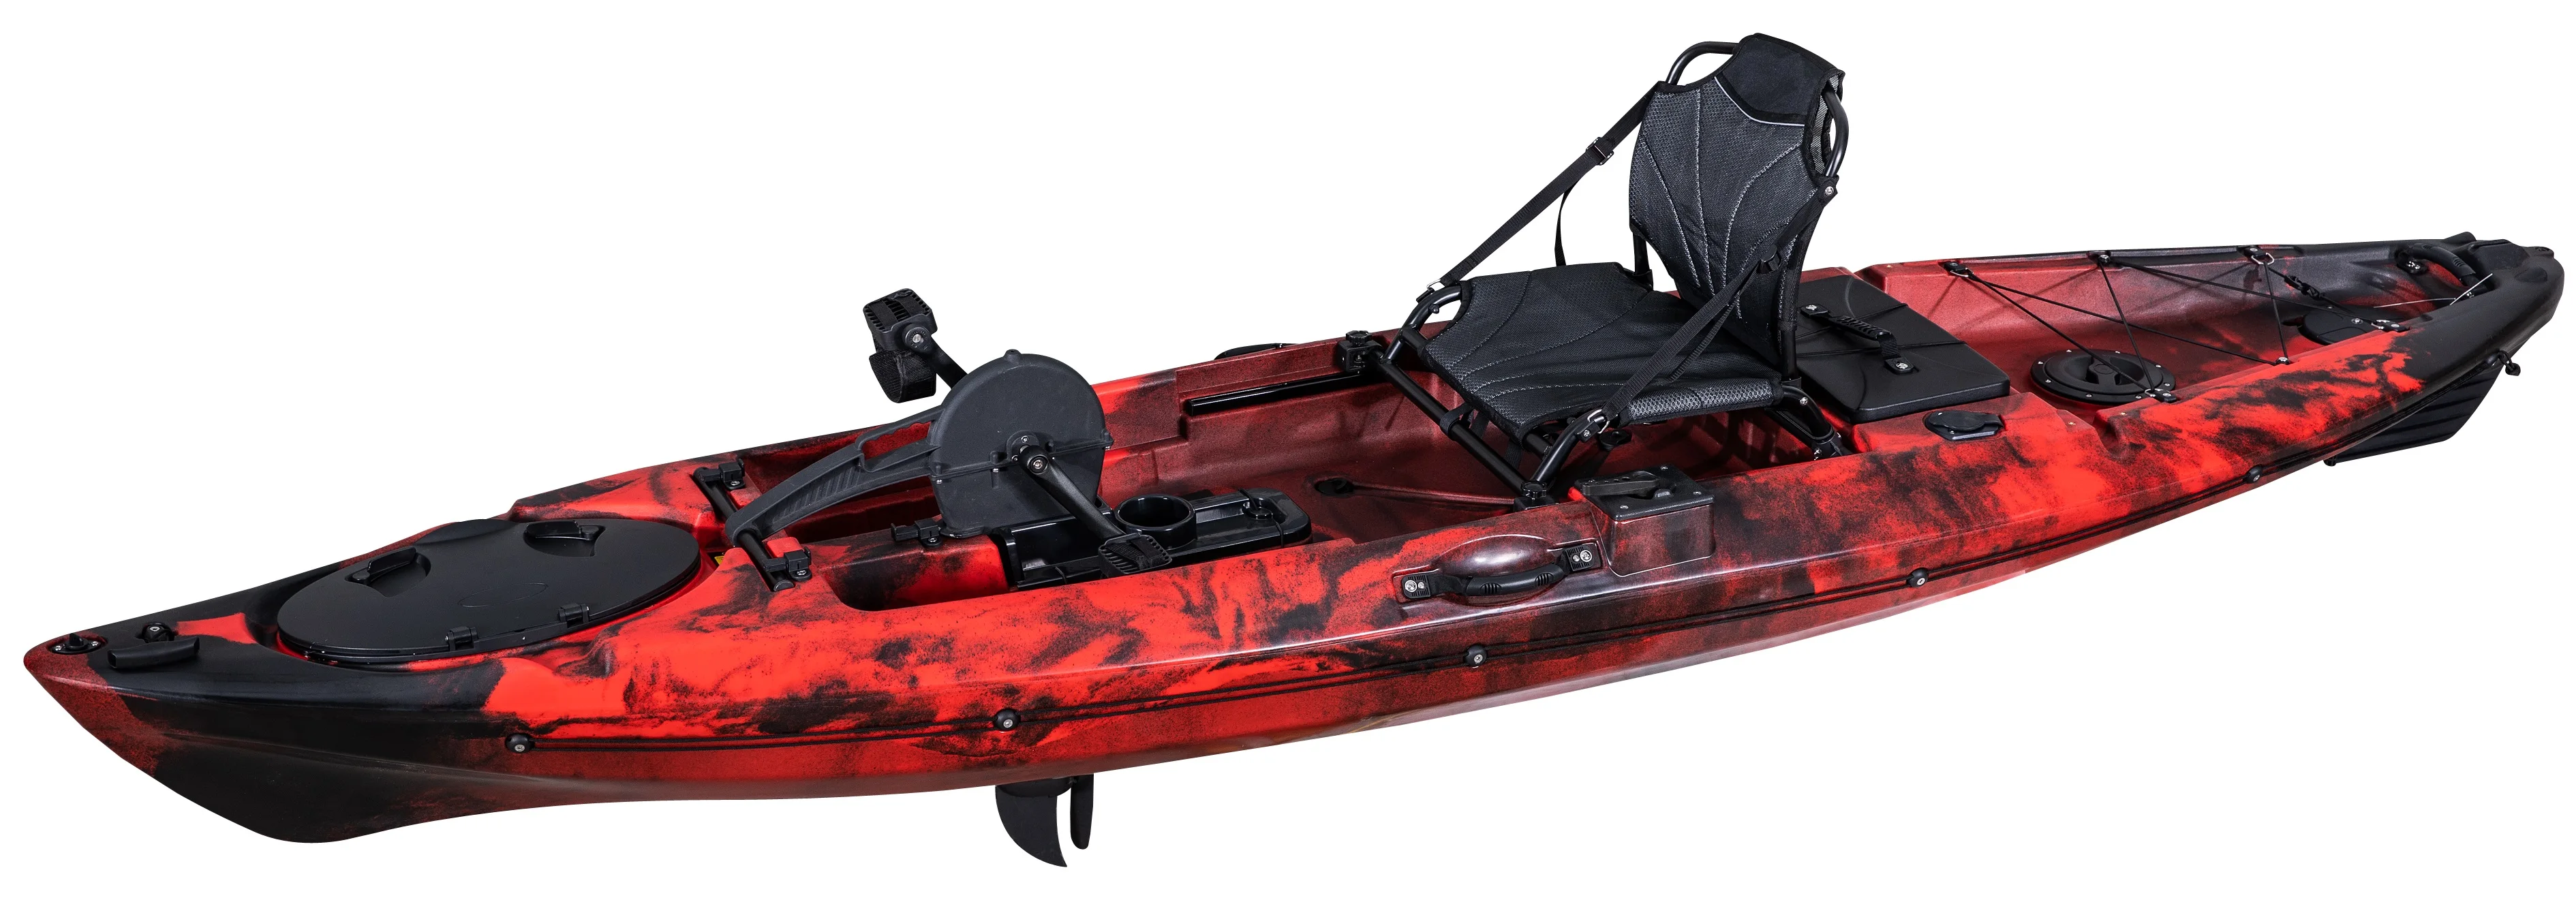 Alibaba Online Trade Show Factory Wholesale 12ft Propel Power Fishing Kayak With Pedal - Buy ...